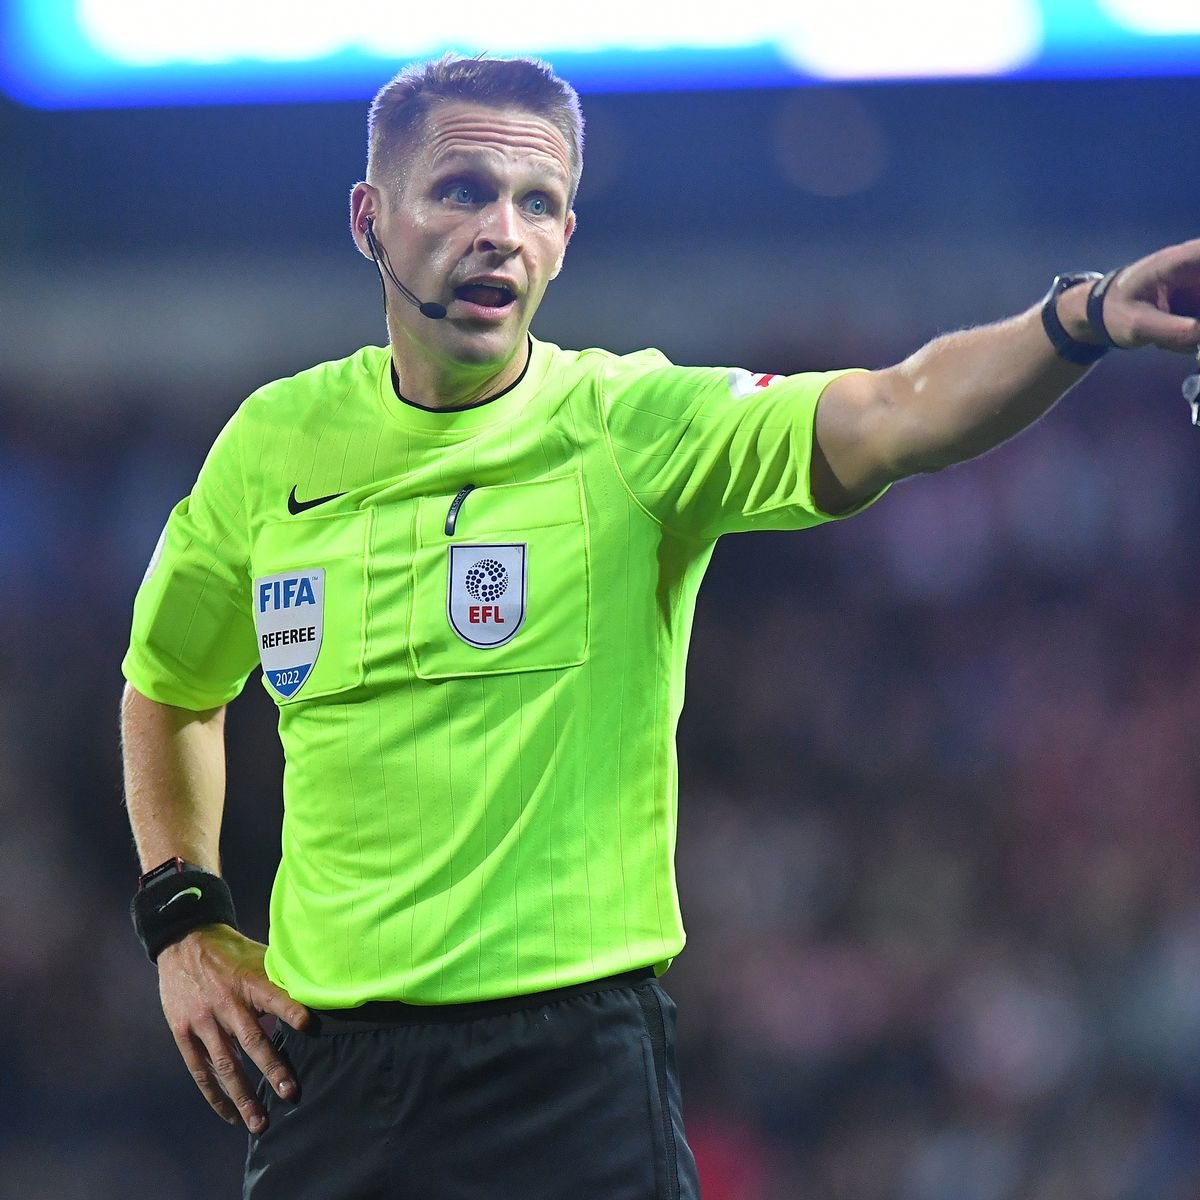 Match Day Officials for our game V SPURS on Sunday
COYG

Referee: Craig Pawson.
 Assistants: Marc Perry, Scott Ledger. Fourth official: Darren England. VAR: Paul Tierney. Assistant VAR: Constantine Hatzidakis. https://t.co/kflcAAFfTs